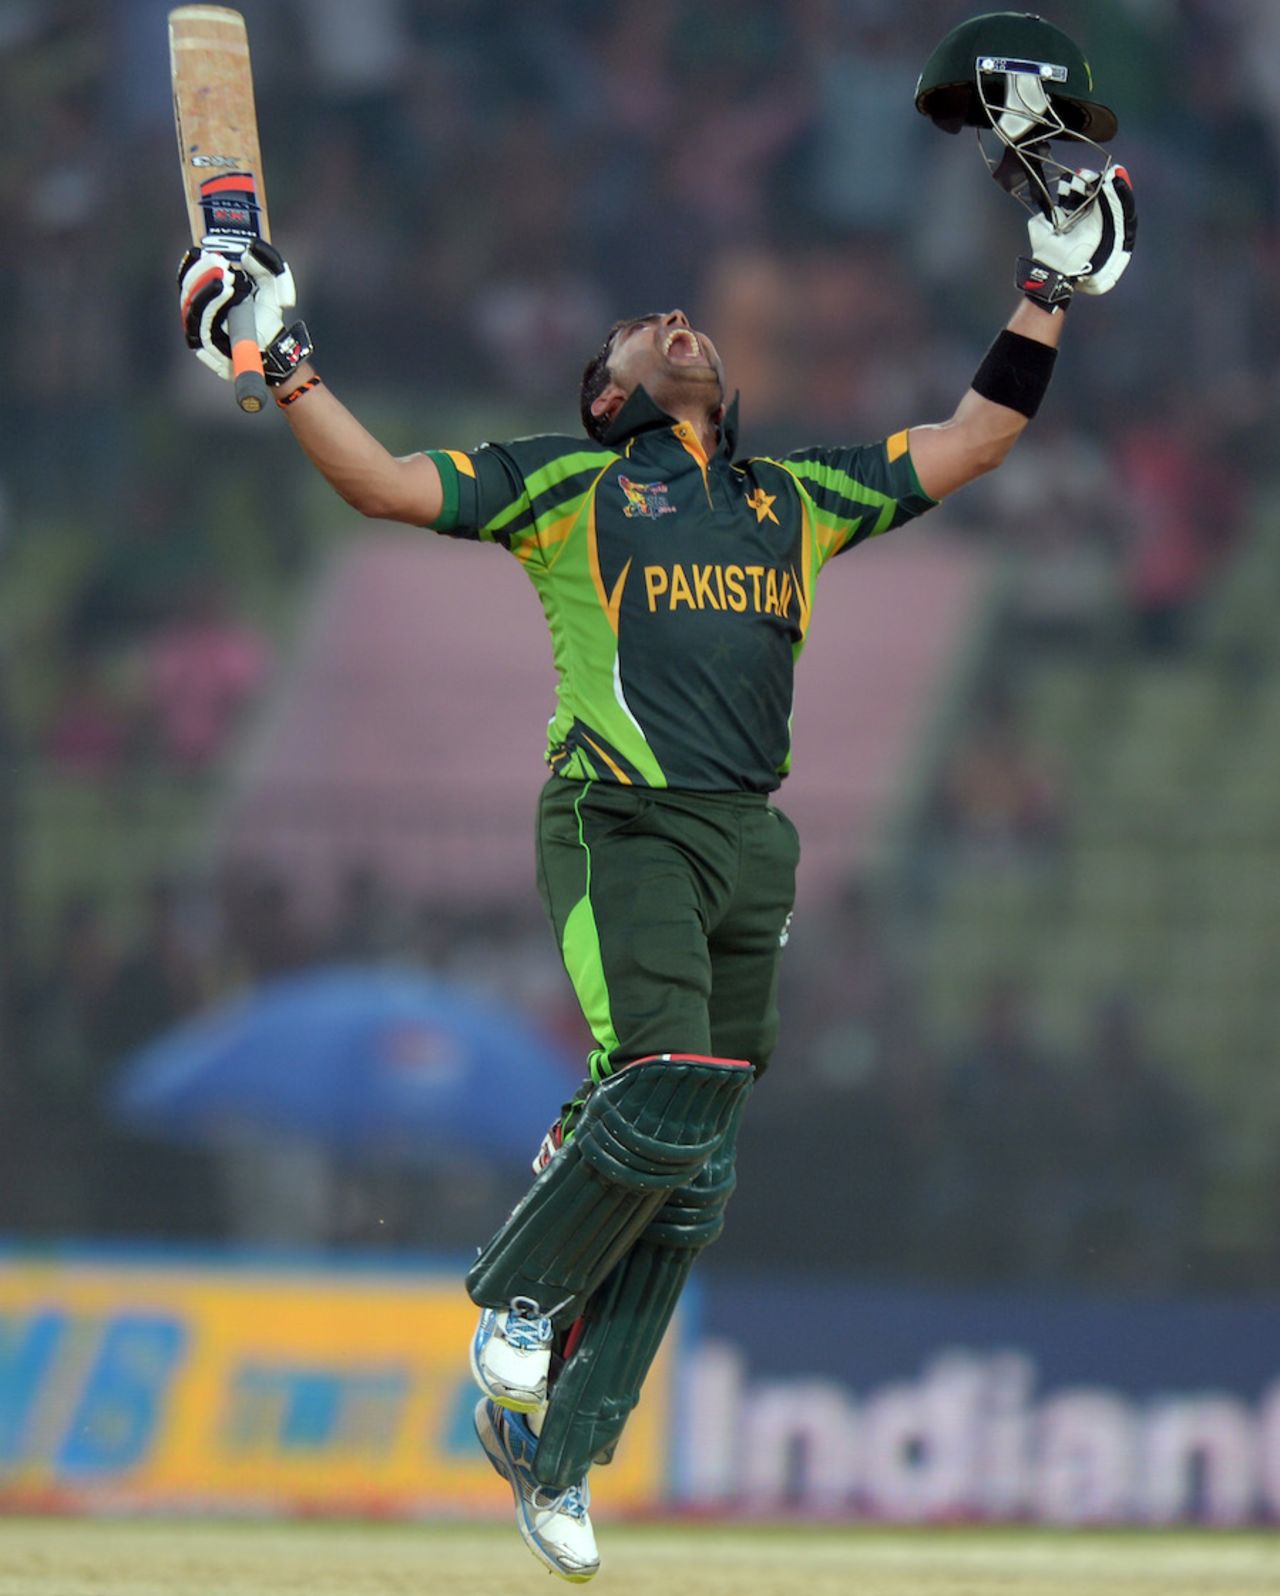 Umar Akmal is ecstatic on reaching his second ODI ton, Afghanistan v Pakistan, Asia Cup 2014, Fatullah, February 27, 2014